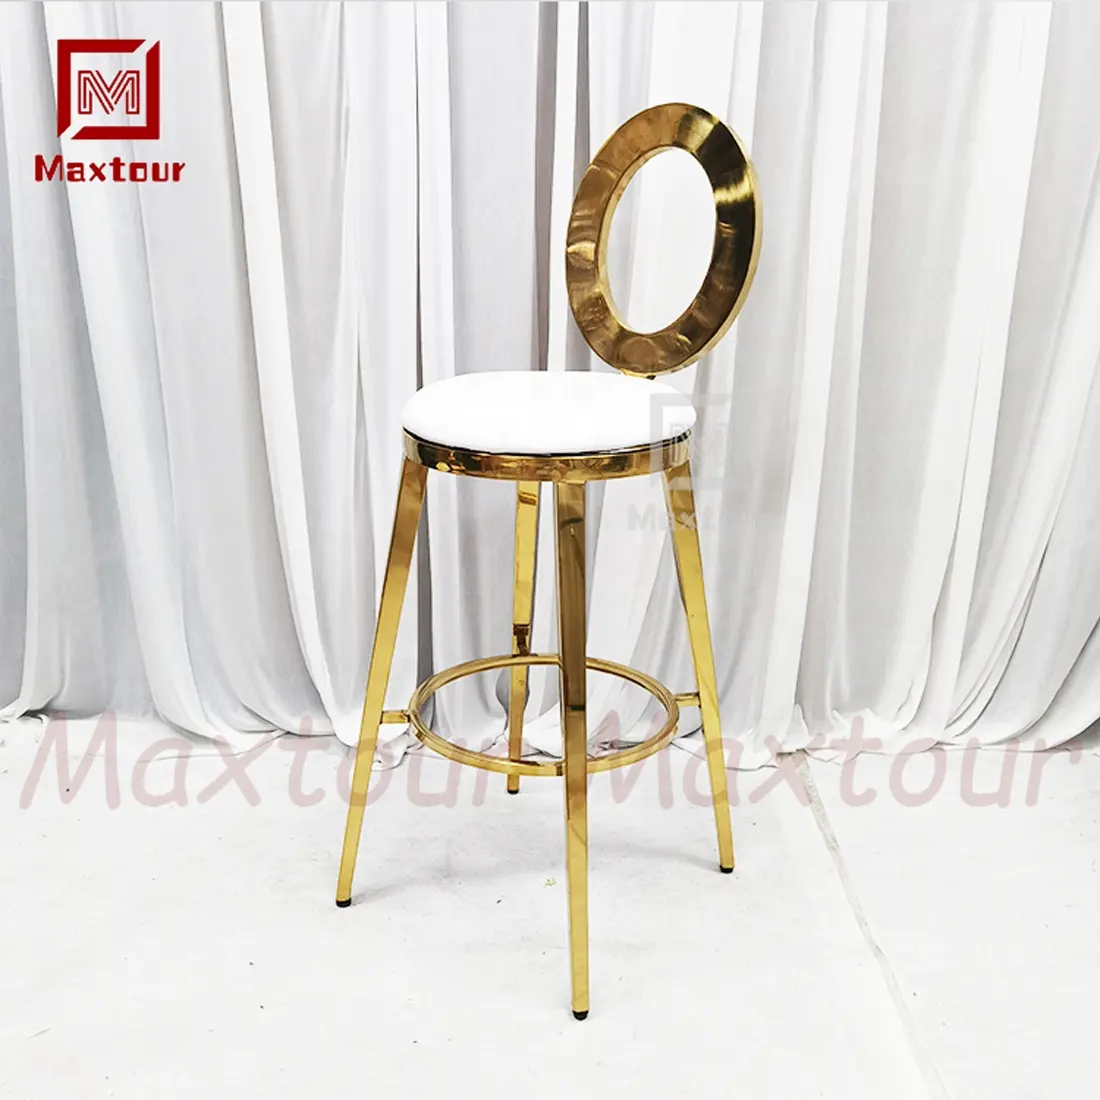 Modern Luxury Gold Metal Bar Stool with round Back High Chair for Kitchen Island Counter for Restaurant and Living Room